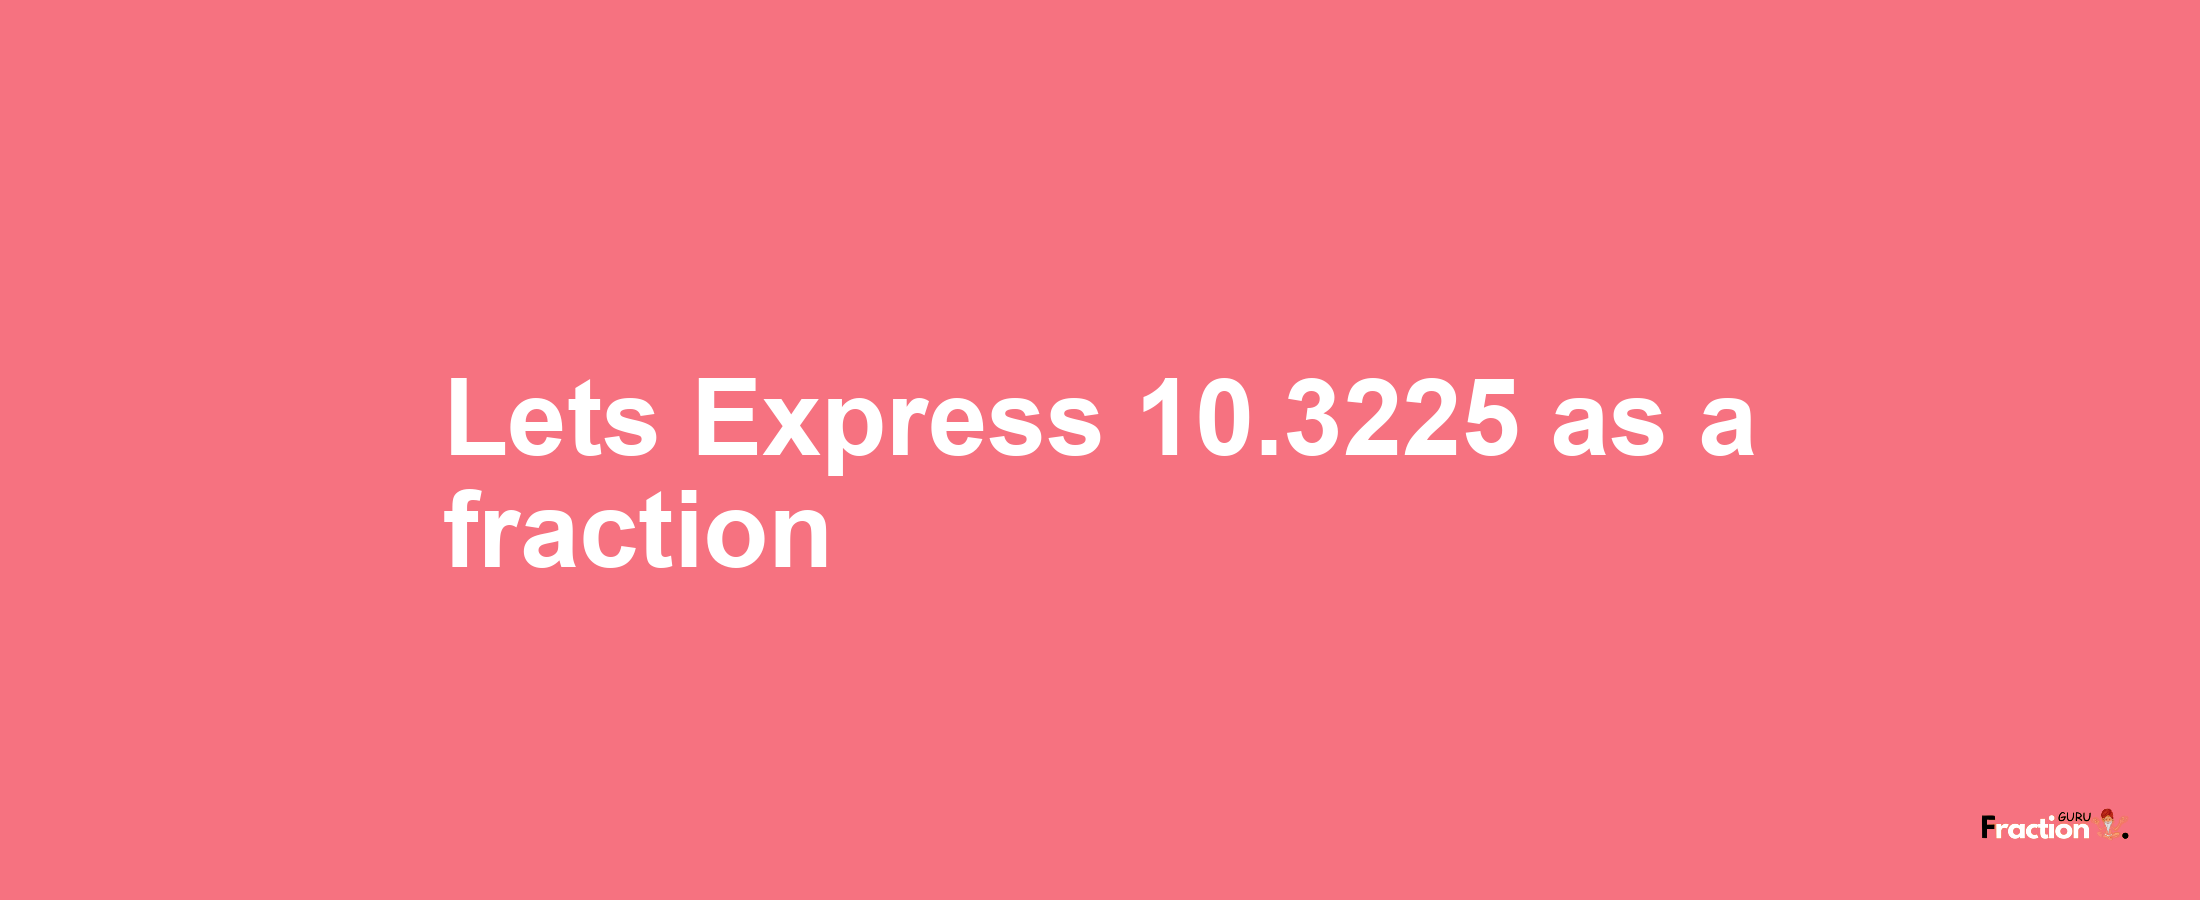 Lets Express 10.3225 as afraction